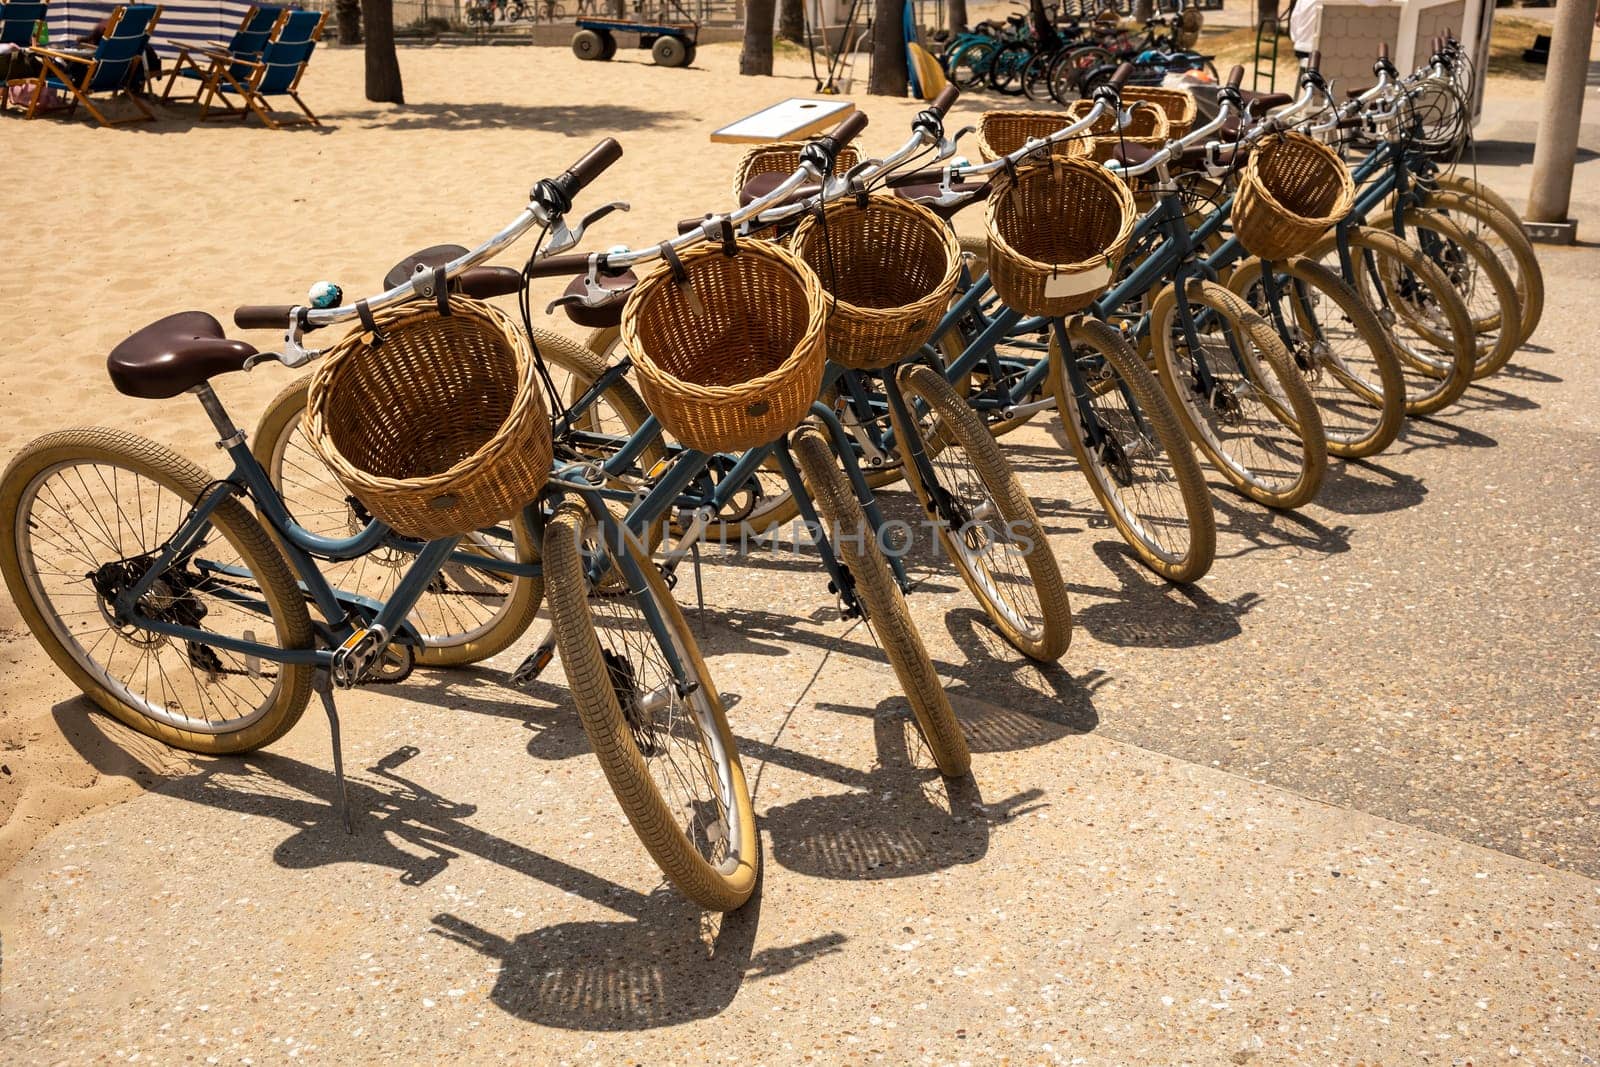 Row of Bicycles with Baskets on Beach. Bicycle Day. Lifestyle, Travel Destination, Vacation. Eco Transportation, Recreation. Horizontal Plane